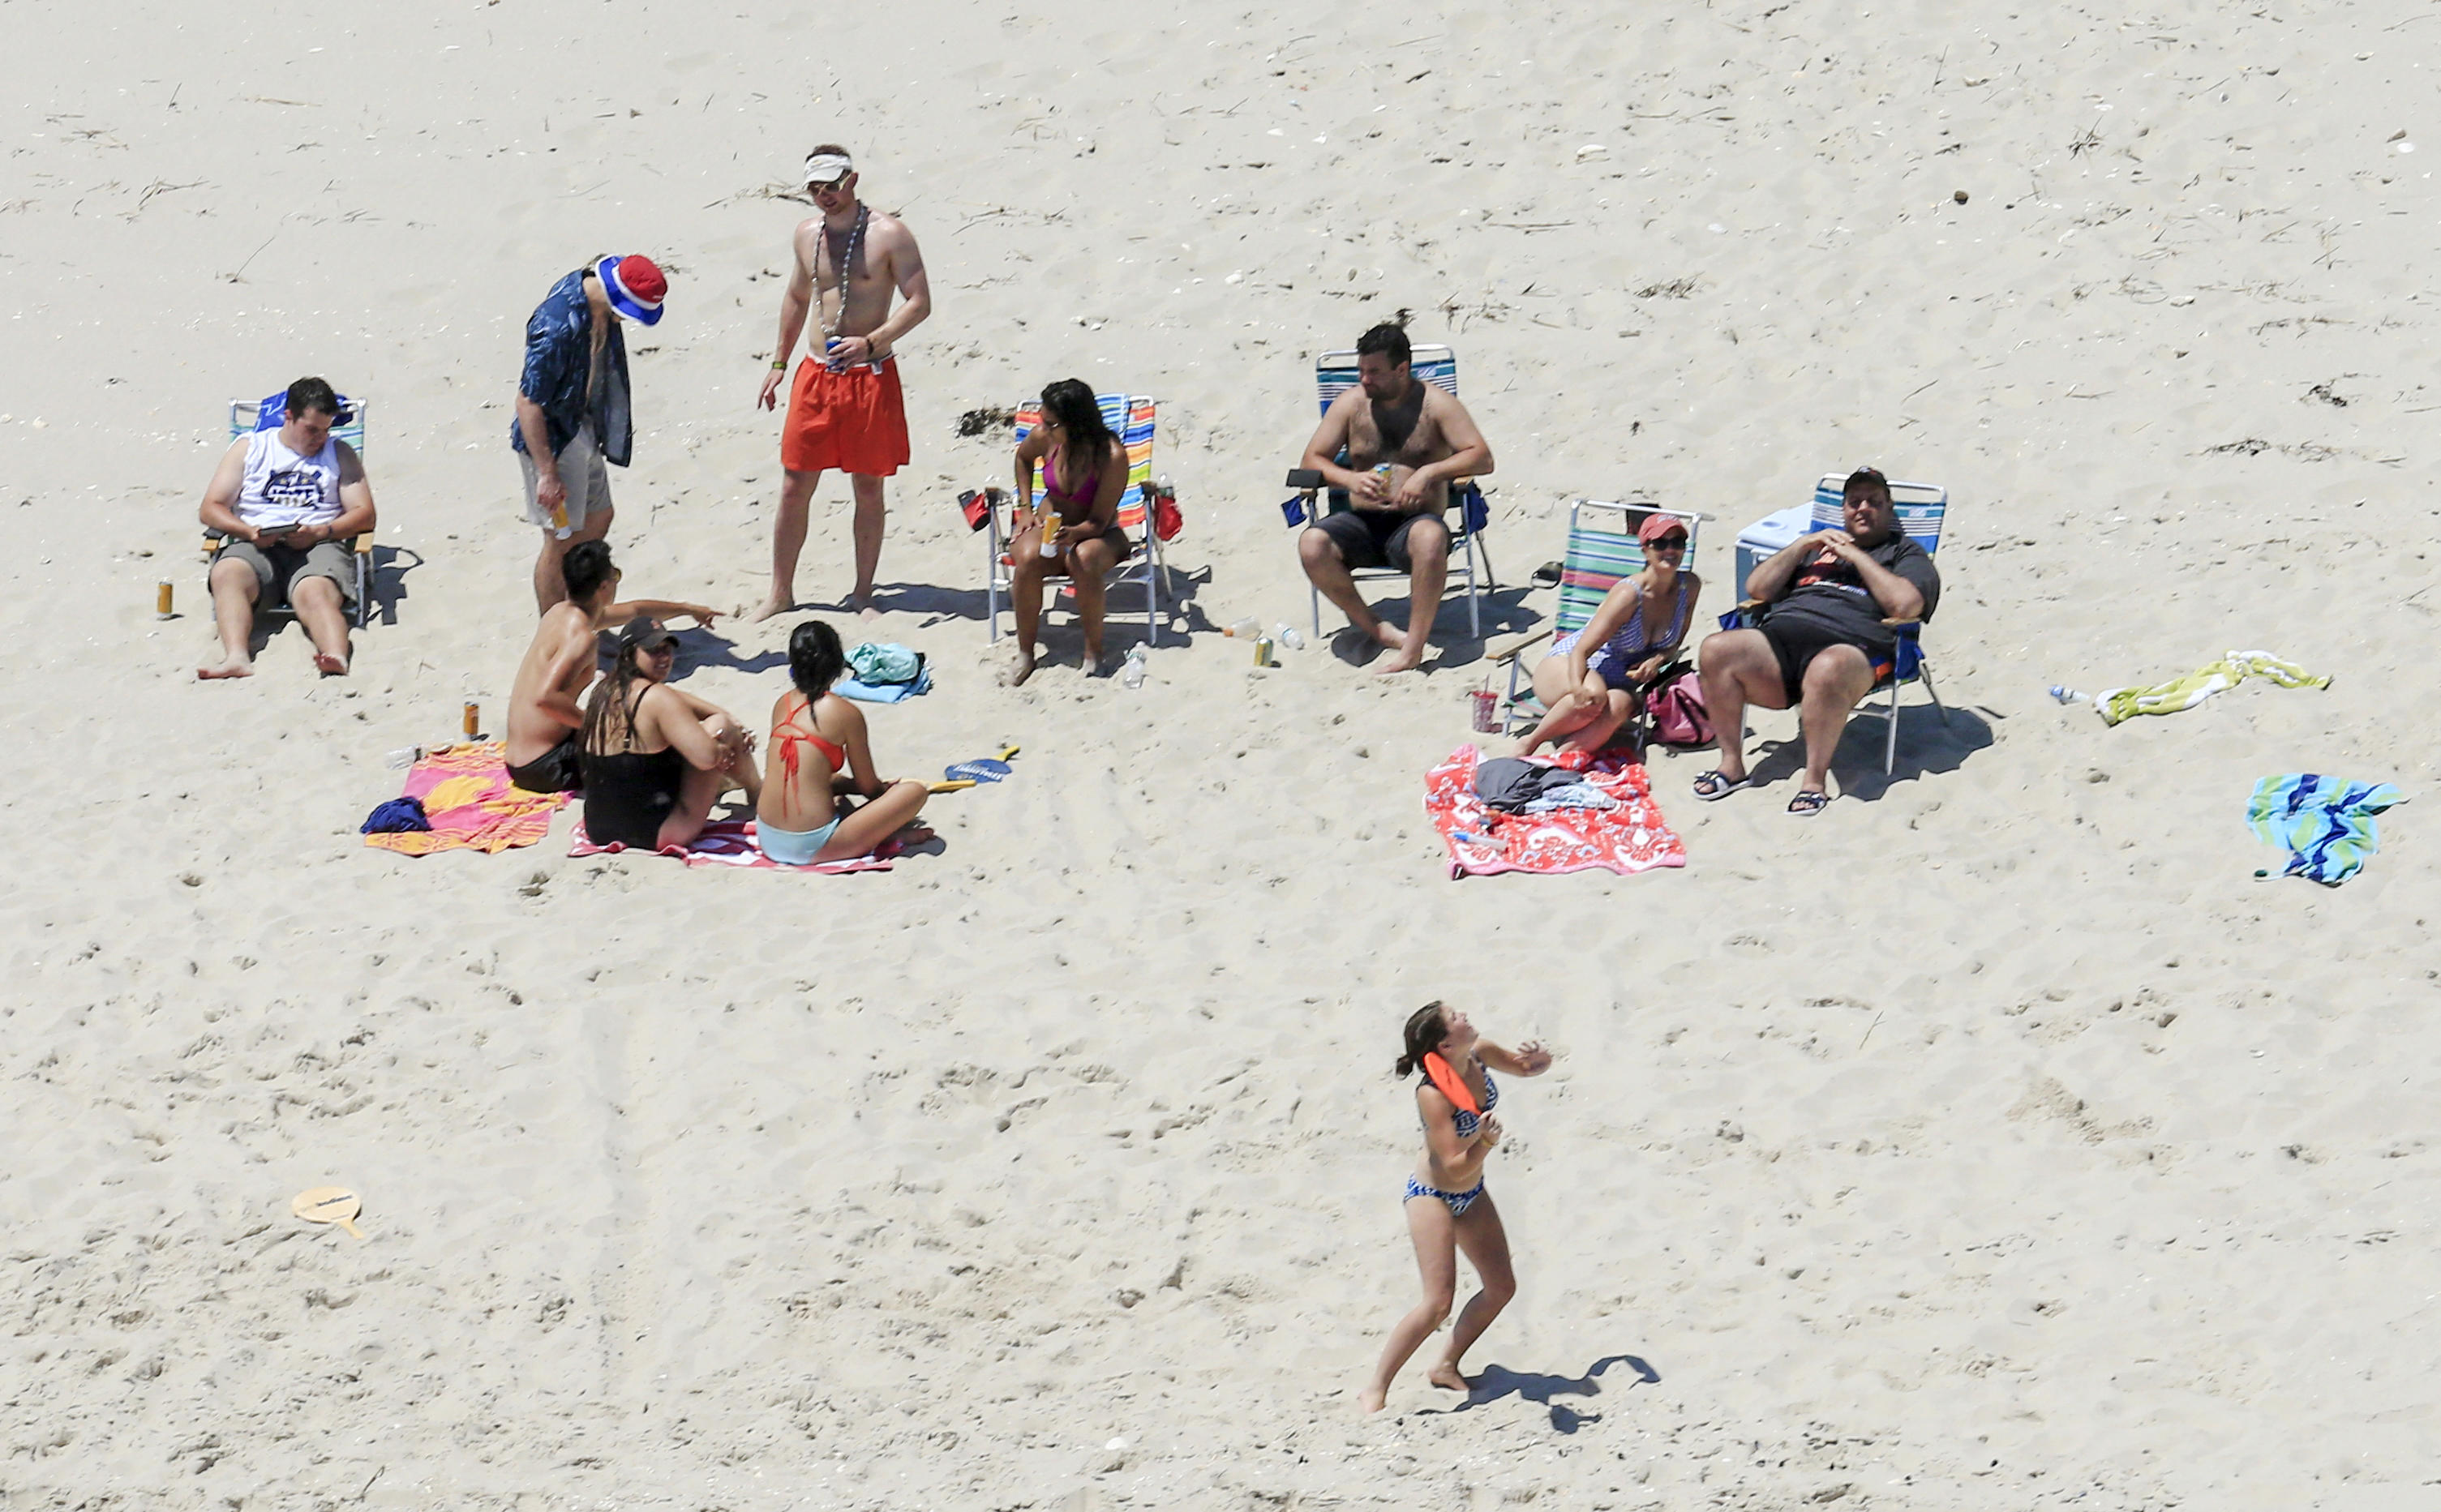 Chris Christie defends going to closed beach during government